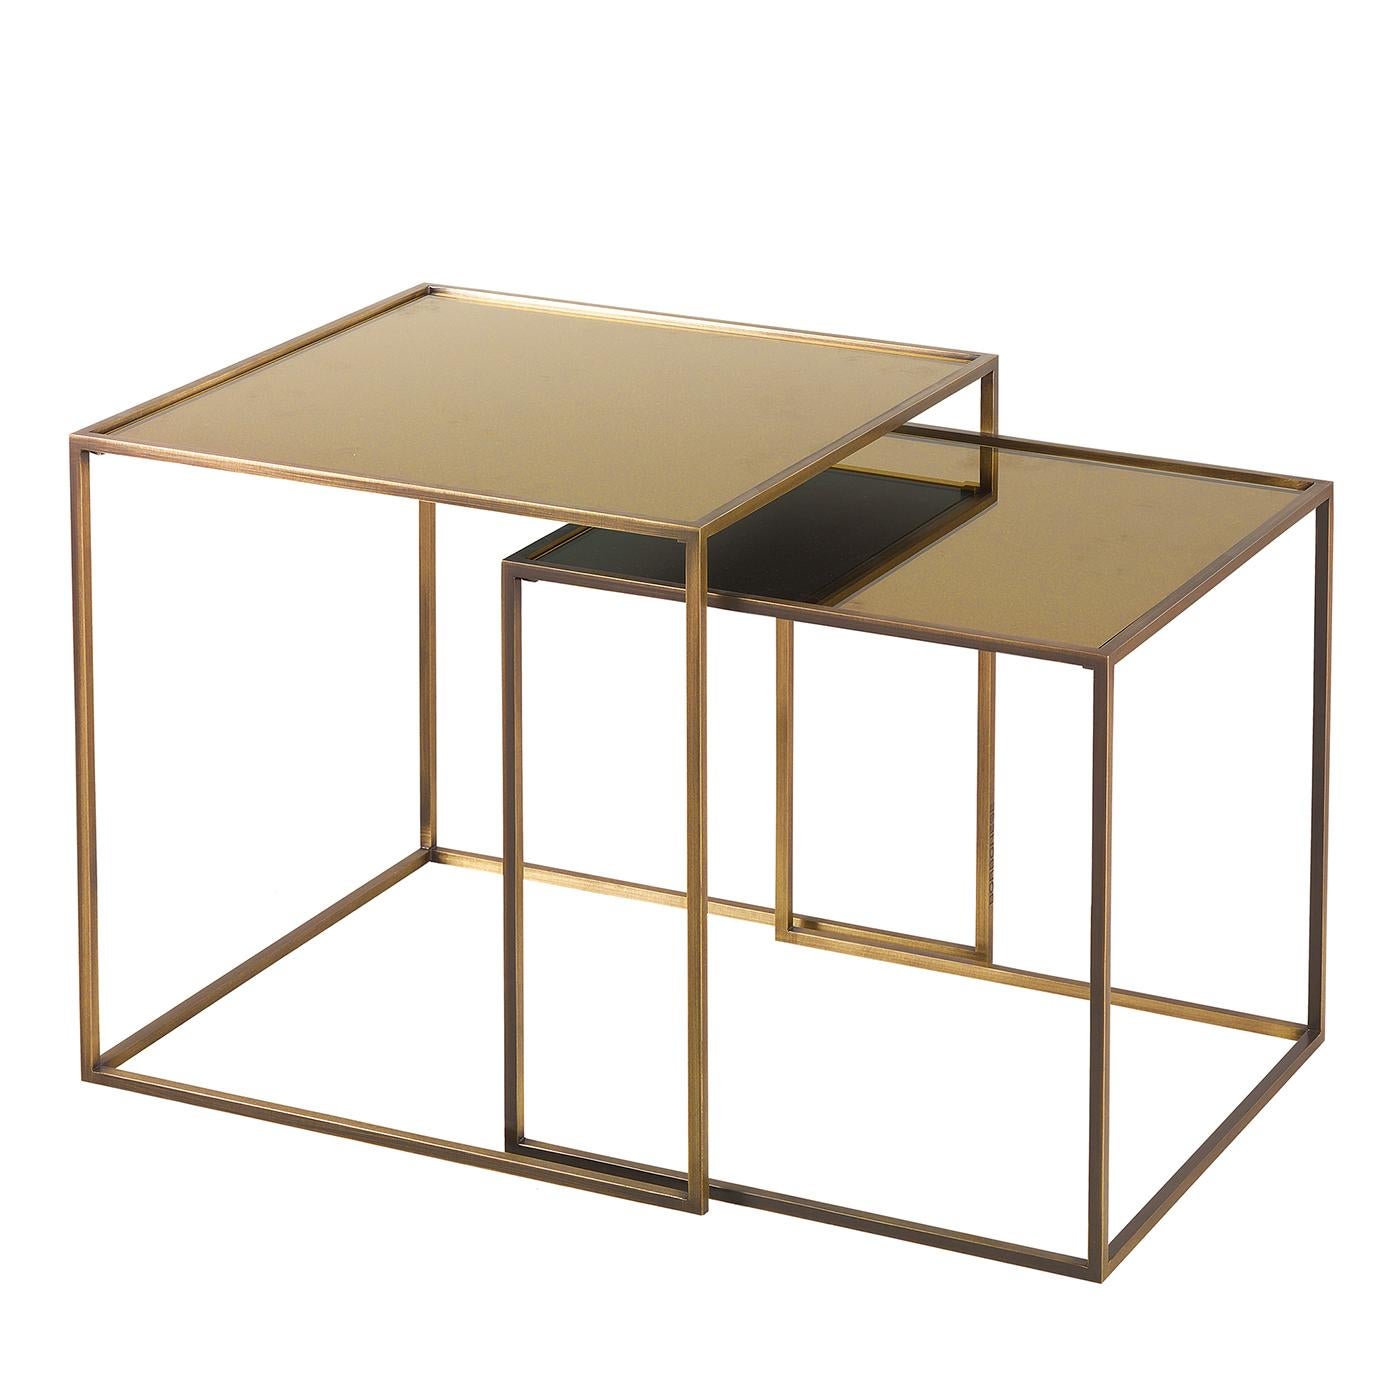 This charming side table is a versatile and elegant addition to a contemporary living room. Entirely crafted of brass, the piece has a minimalist structure open on one side to allow the nesting with the other piece from the Friends collection. The